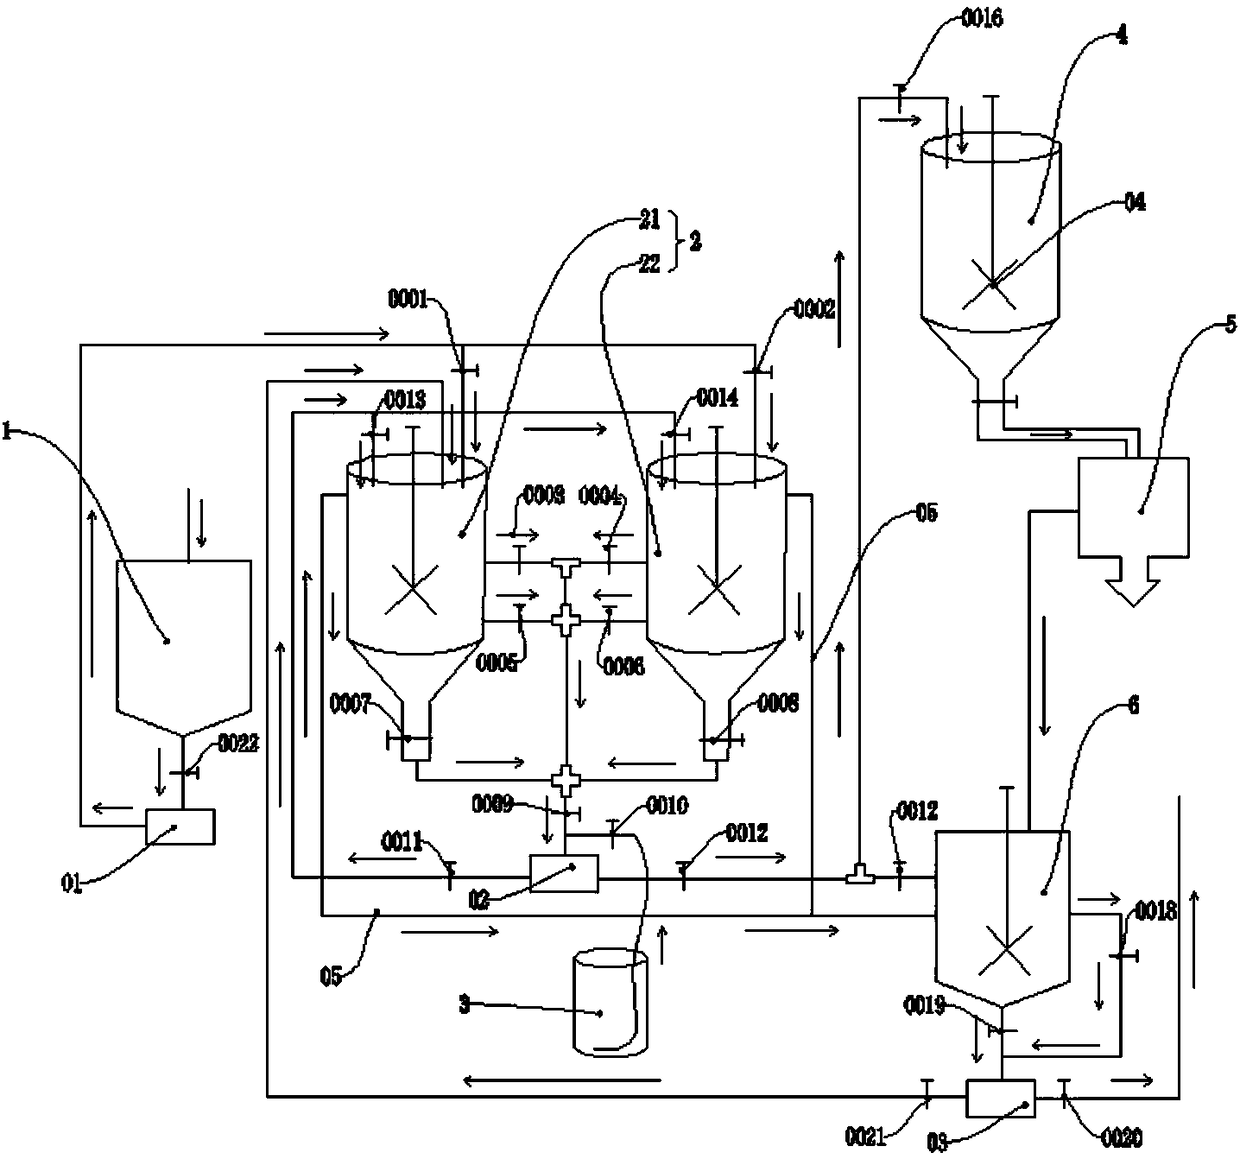 System and process for recovering aluminum hydroxide by pot mold liquid